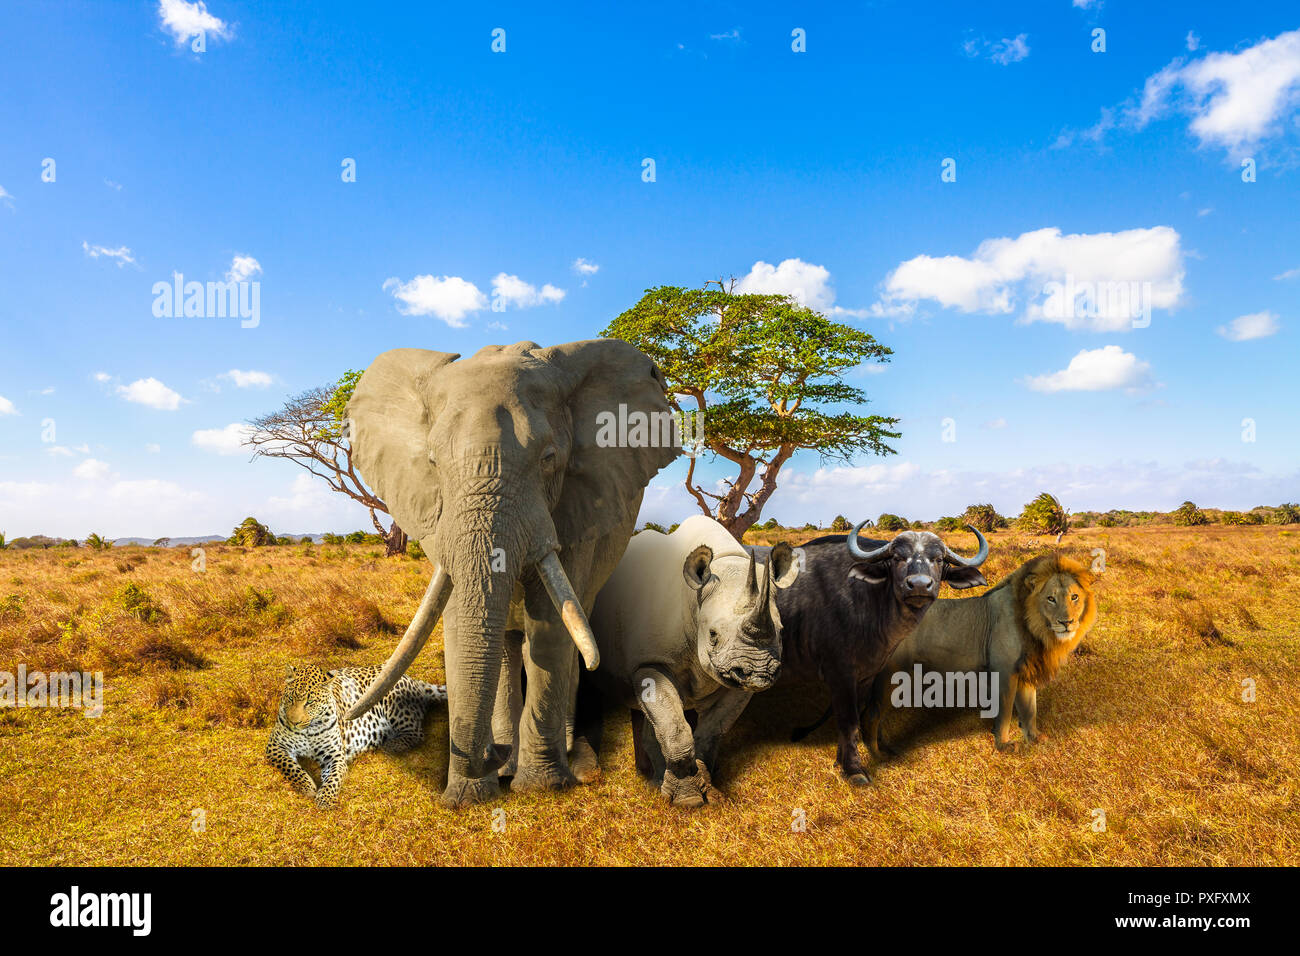 African Big Five: Leopard, Elephant, Black Rhino, Buffalo and Lion in savannah landscape. Africa safari scene with wild animals. Copy space with blue sky. Wildlife background. Stock Photo